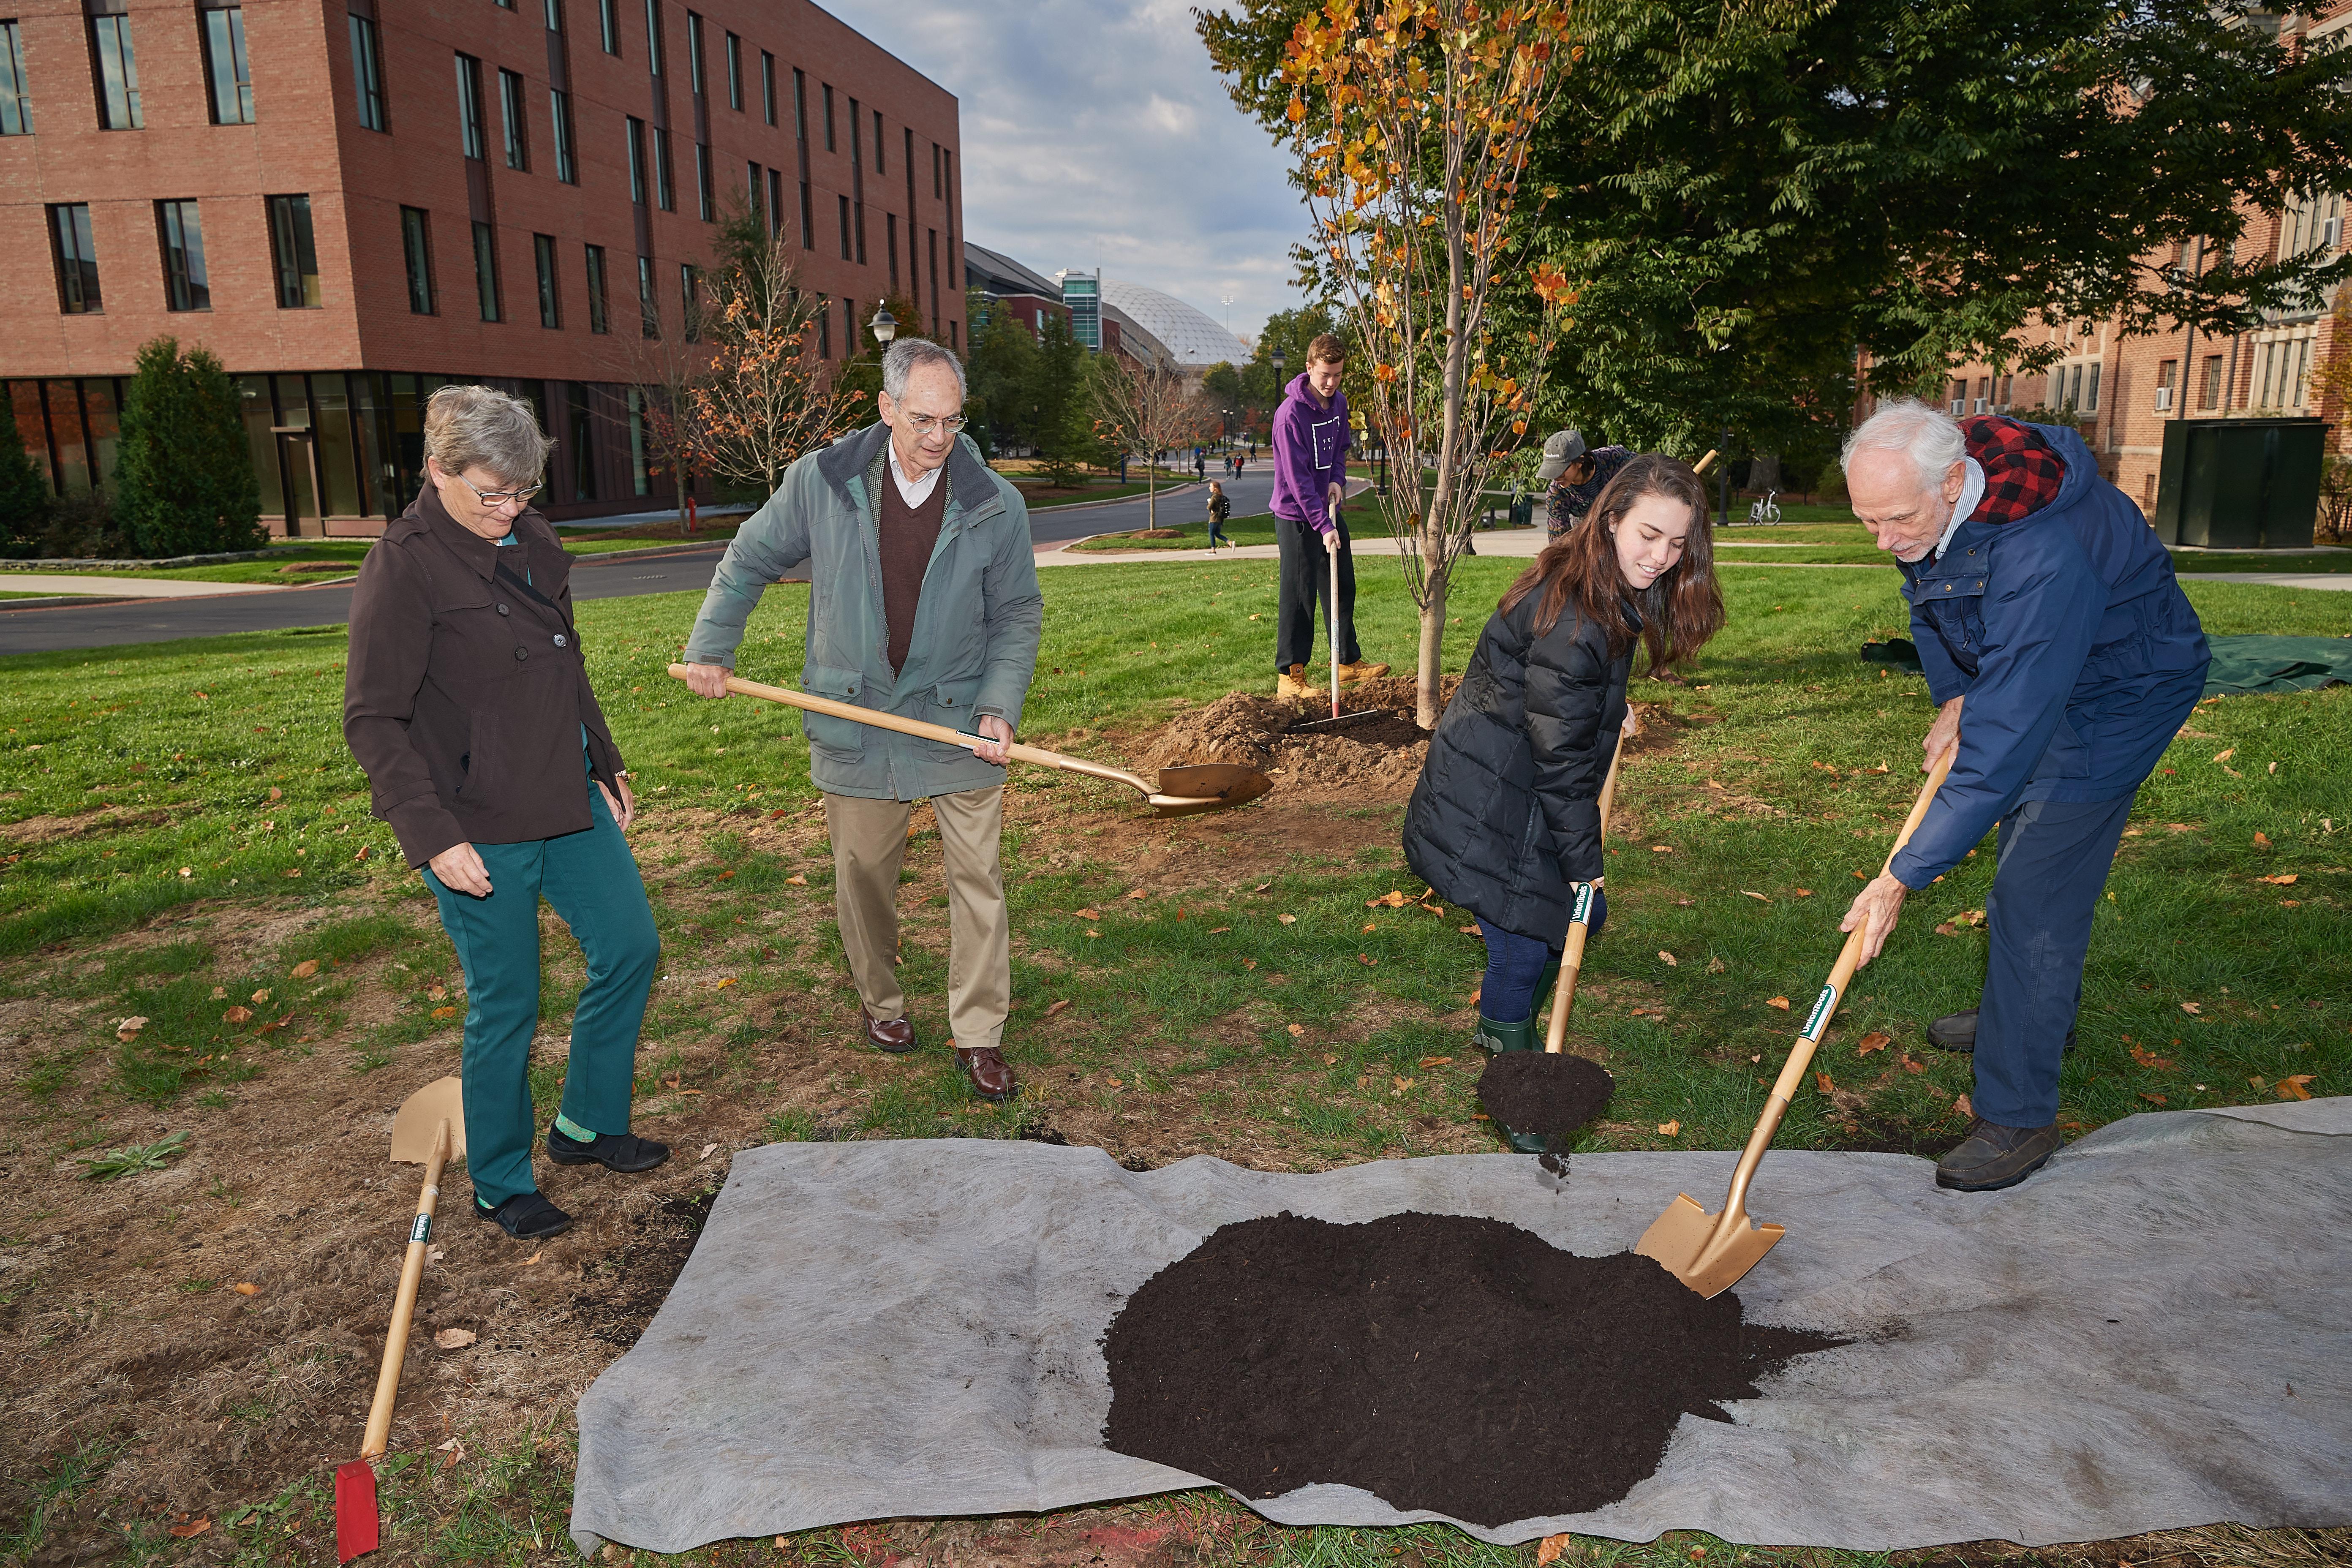 Eileen McHugh, university tree warden, left, Richard Brown, Distinguished Professor Emeritus of History, Natalie Roach '21 (CLAS), and Greg Anderson, Distinguished Professor Emeritus of Ecology and Evolutionary Biology, participate in the ceremonial planting of the Class of 2019 tree near the William H. Hall Building on Oct. 23, 2018. (Peter Morenus/UConn Photo)